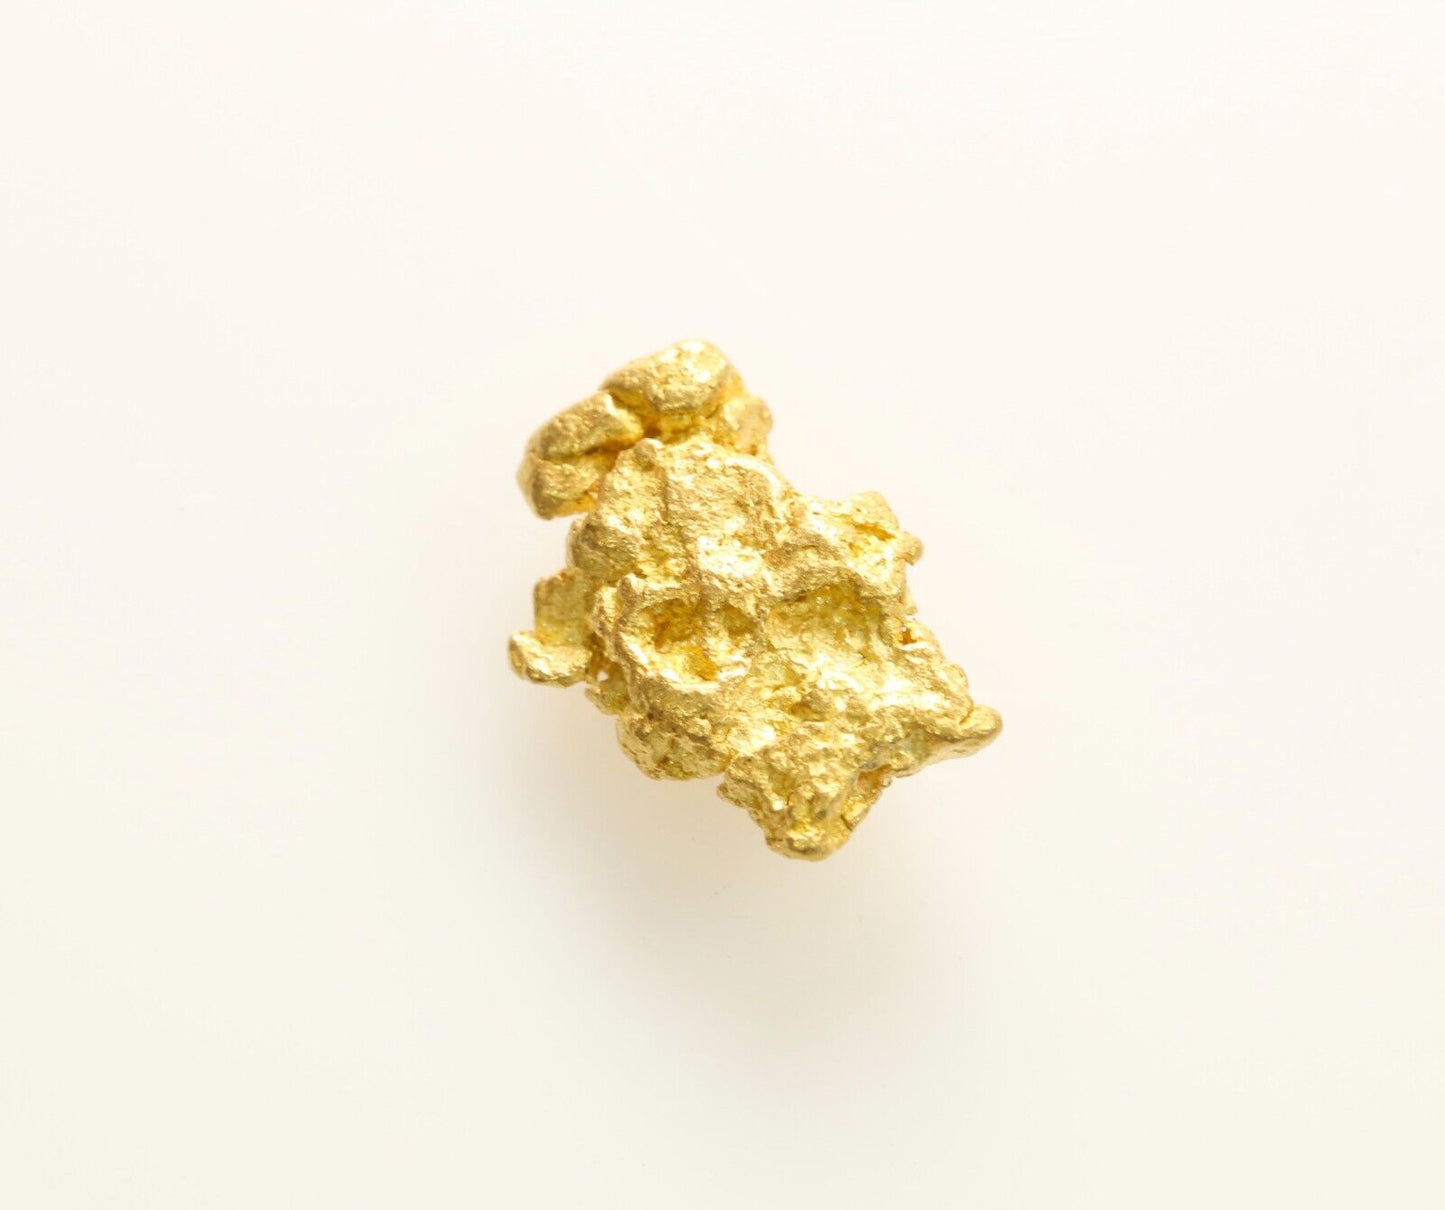 Natural Gold Nugget Australian Leonora Outback Goldfields 1.6 Grams